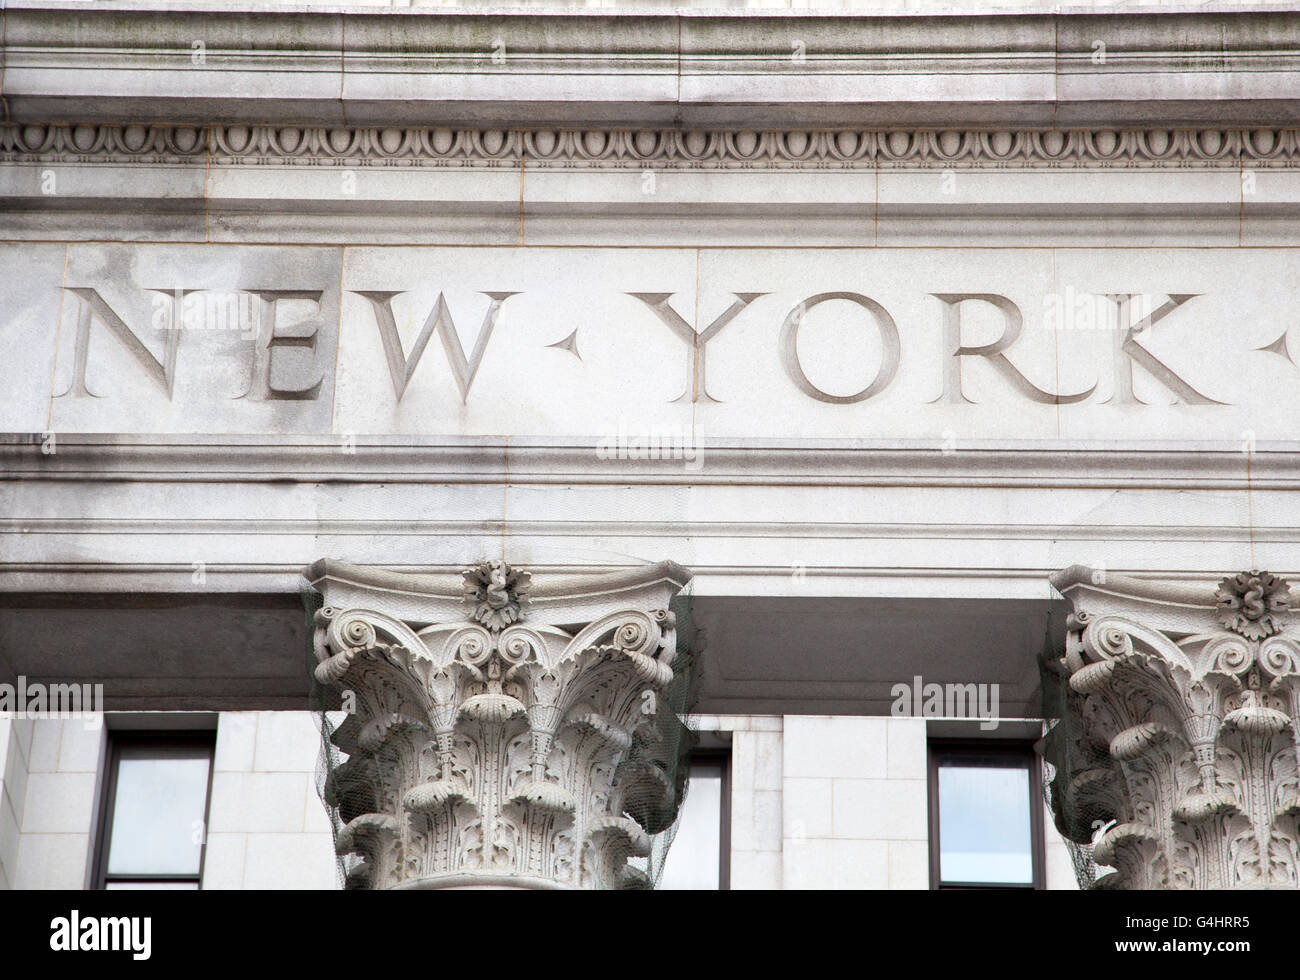 The exterior of a building in Lower Manhattan (New York City). Stock Photo